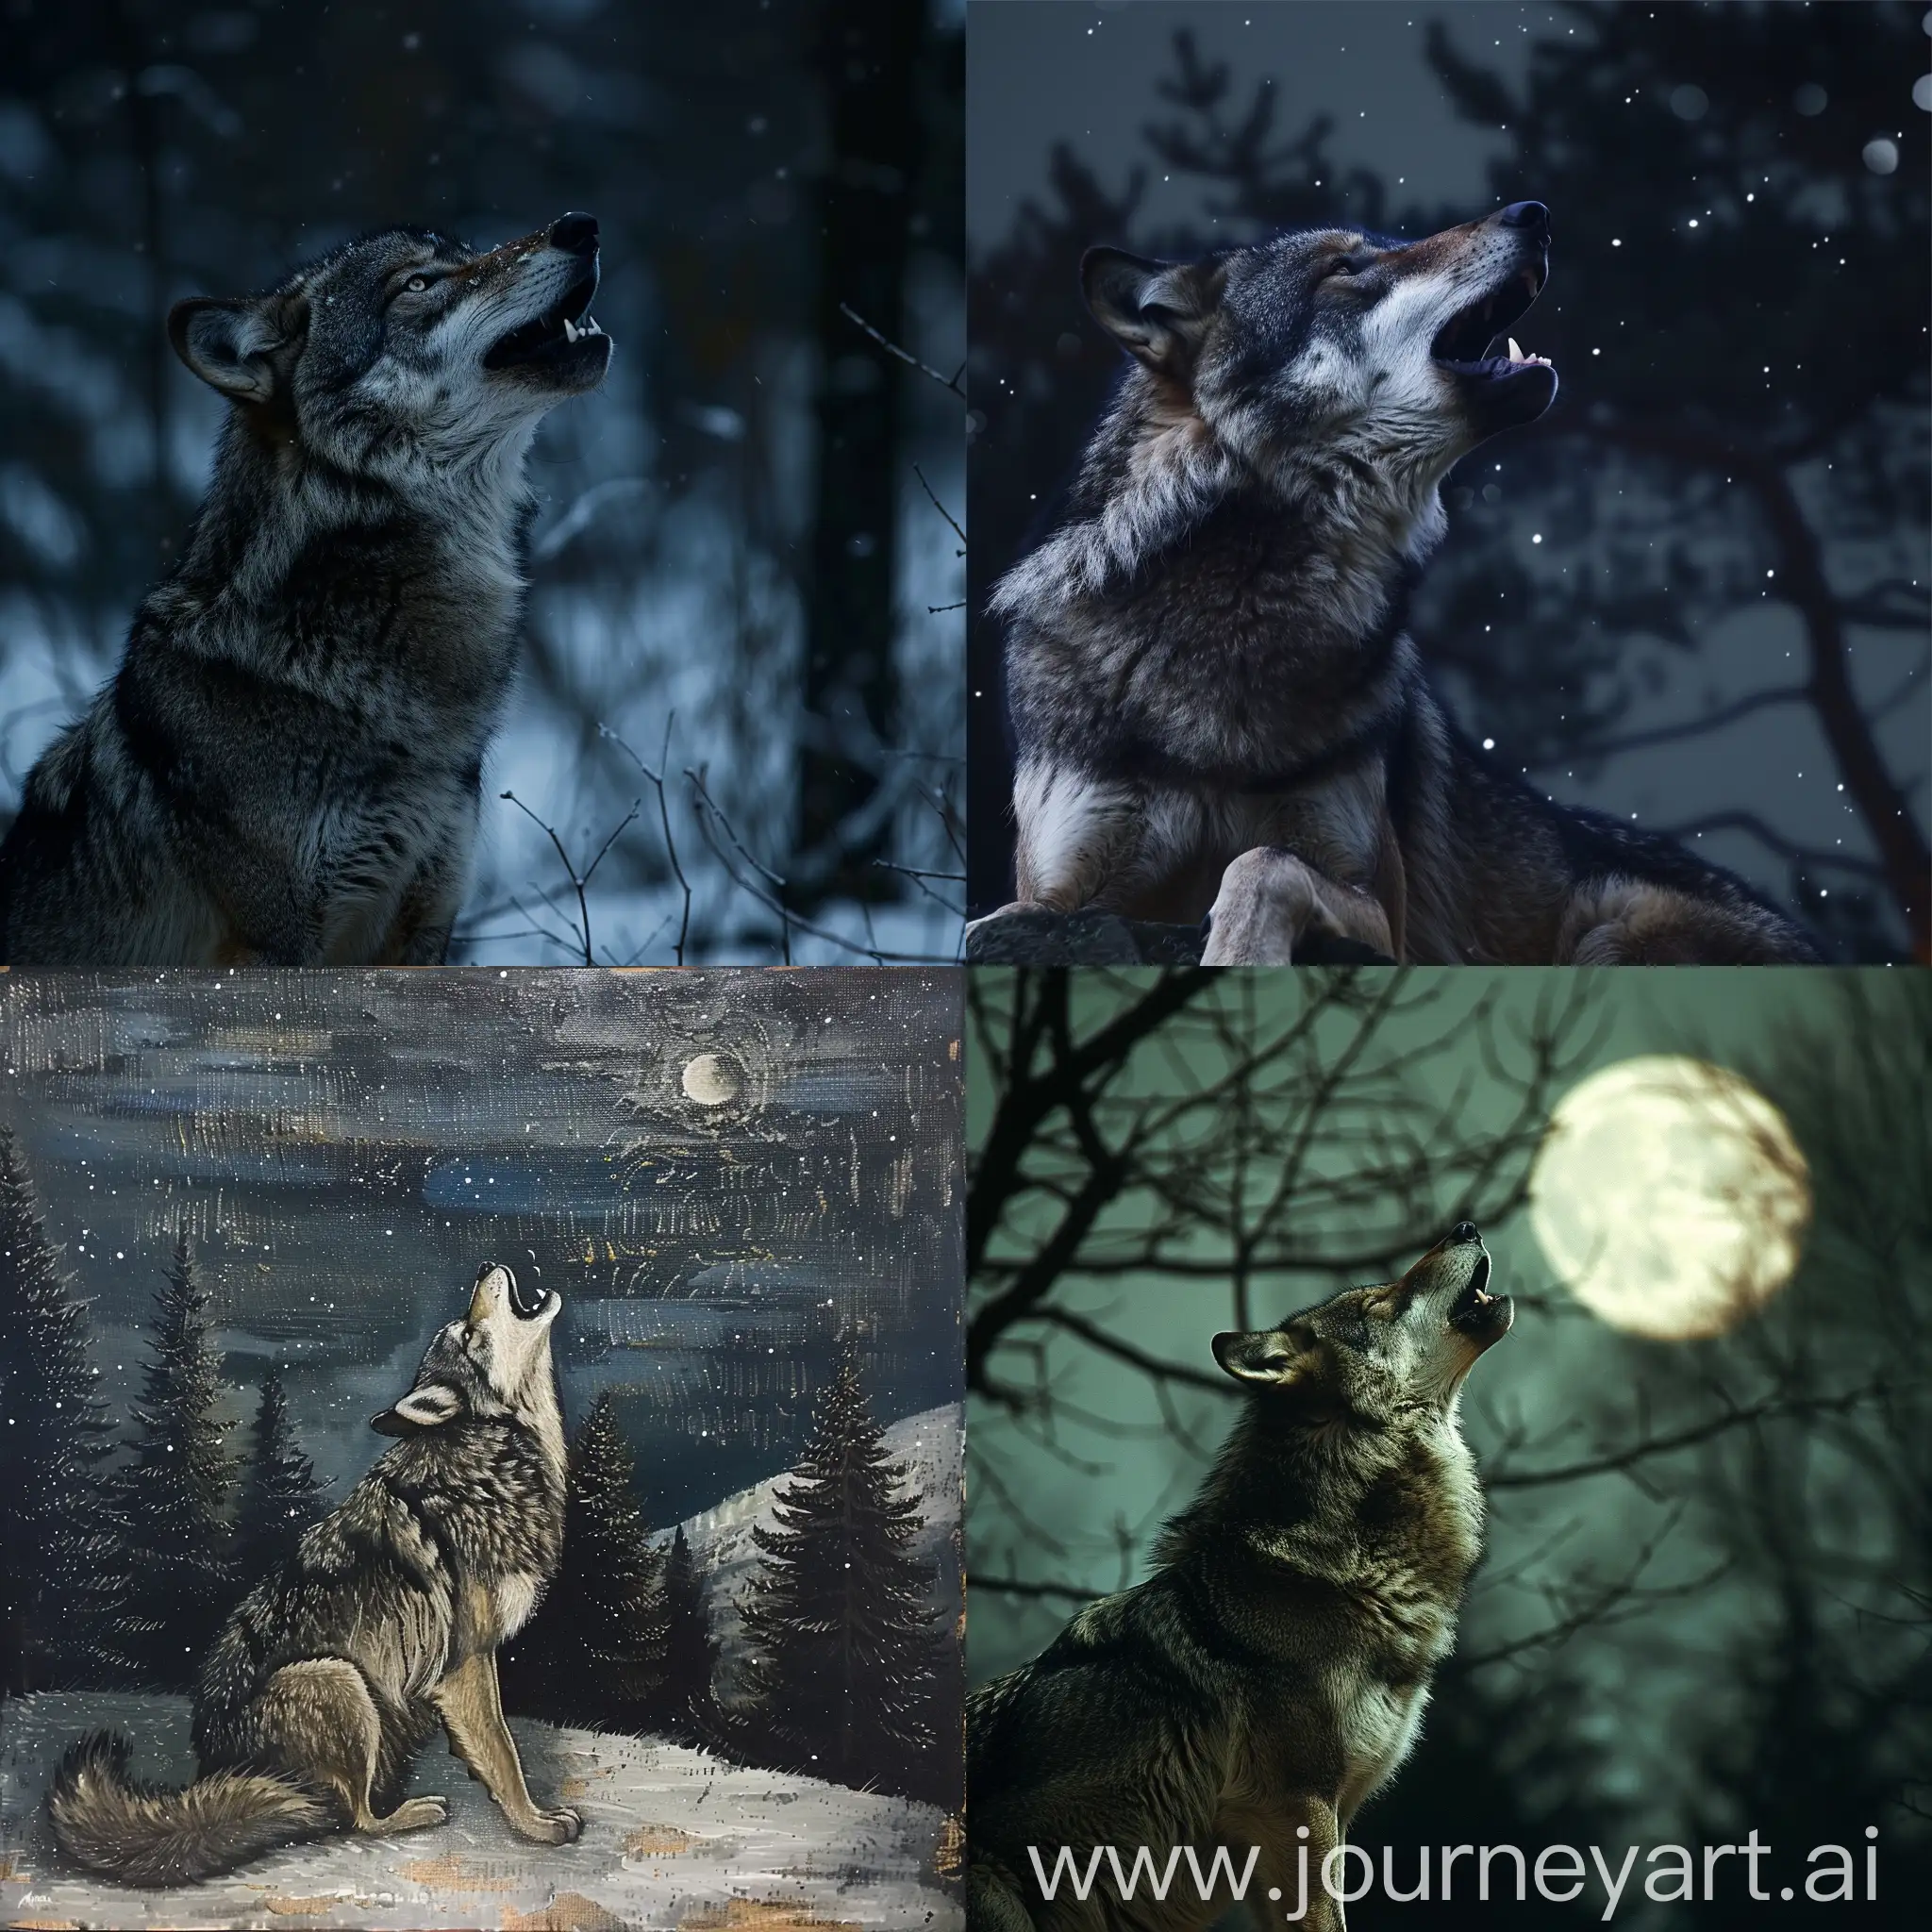 Lone-Wolf-Howling-in-the-Serene-Night